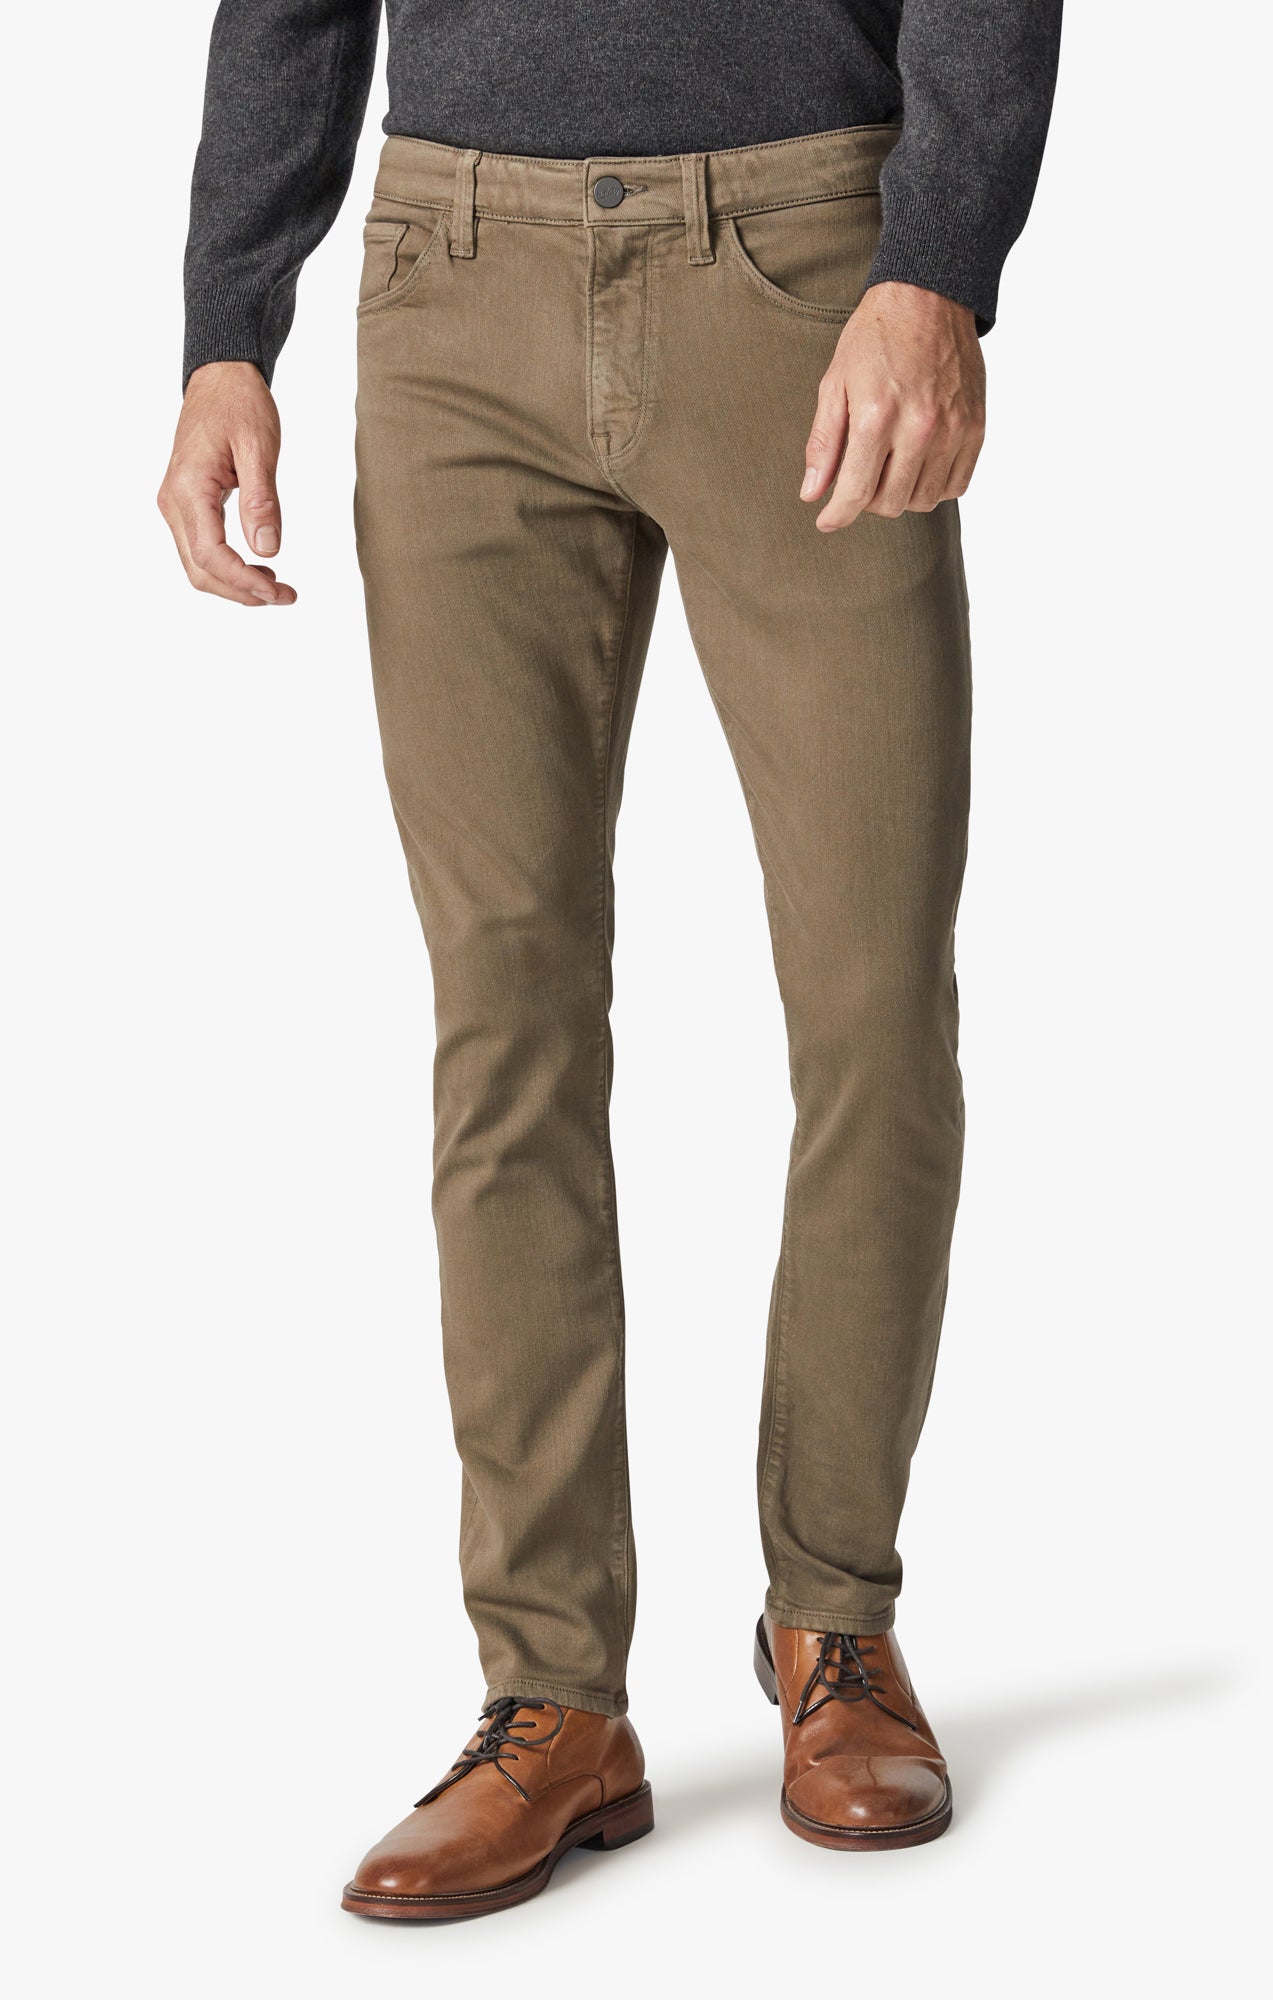 Cool Tapered Leg Pants in Walnut Comfort Image 2